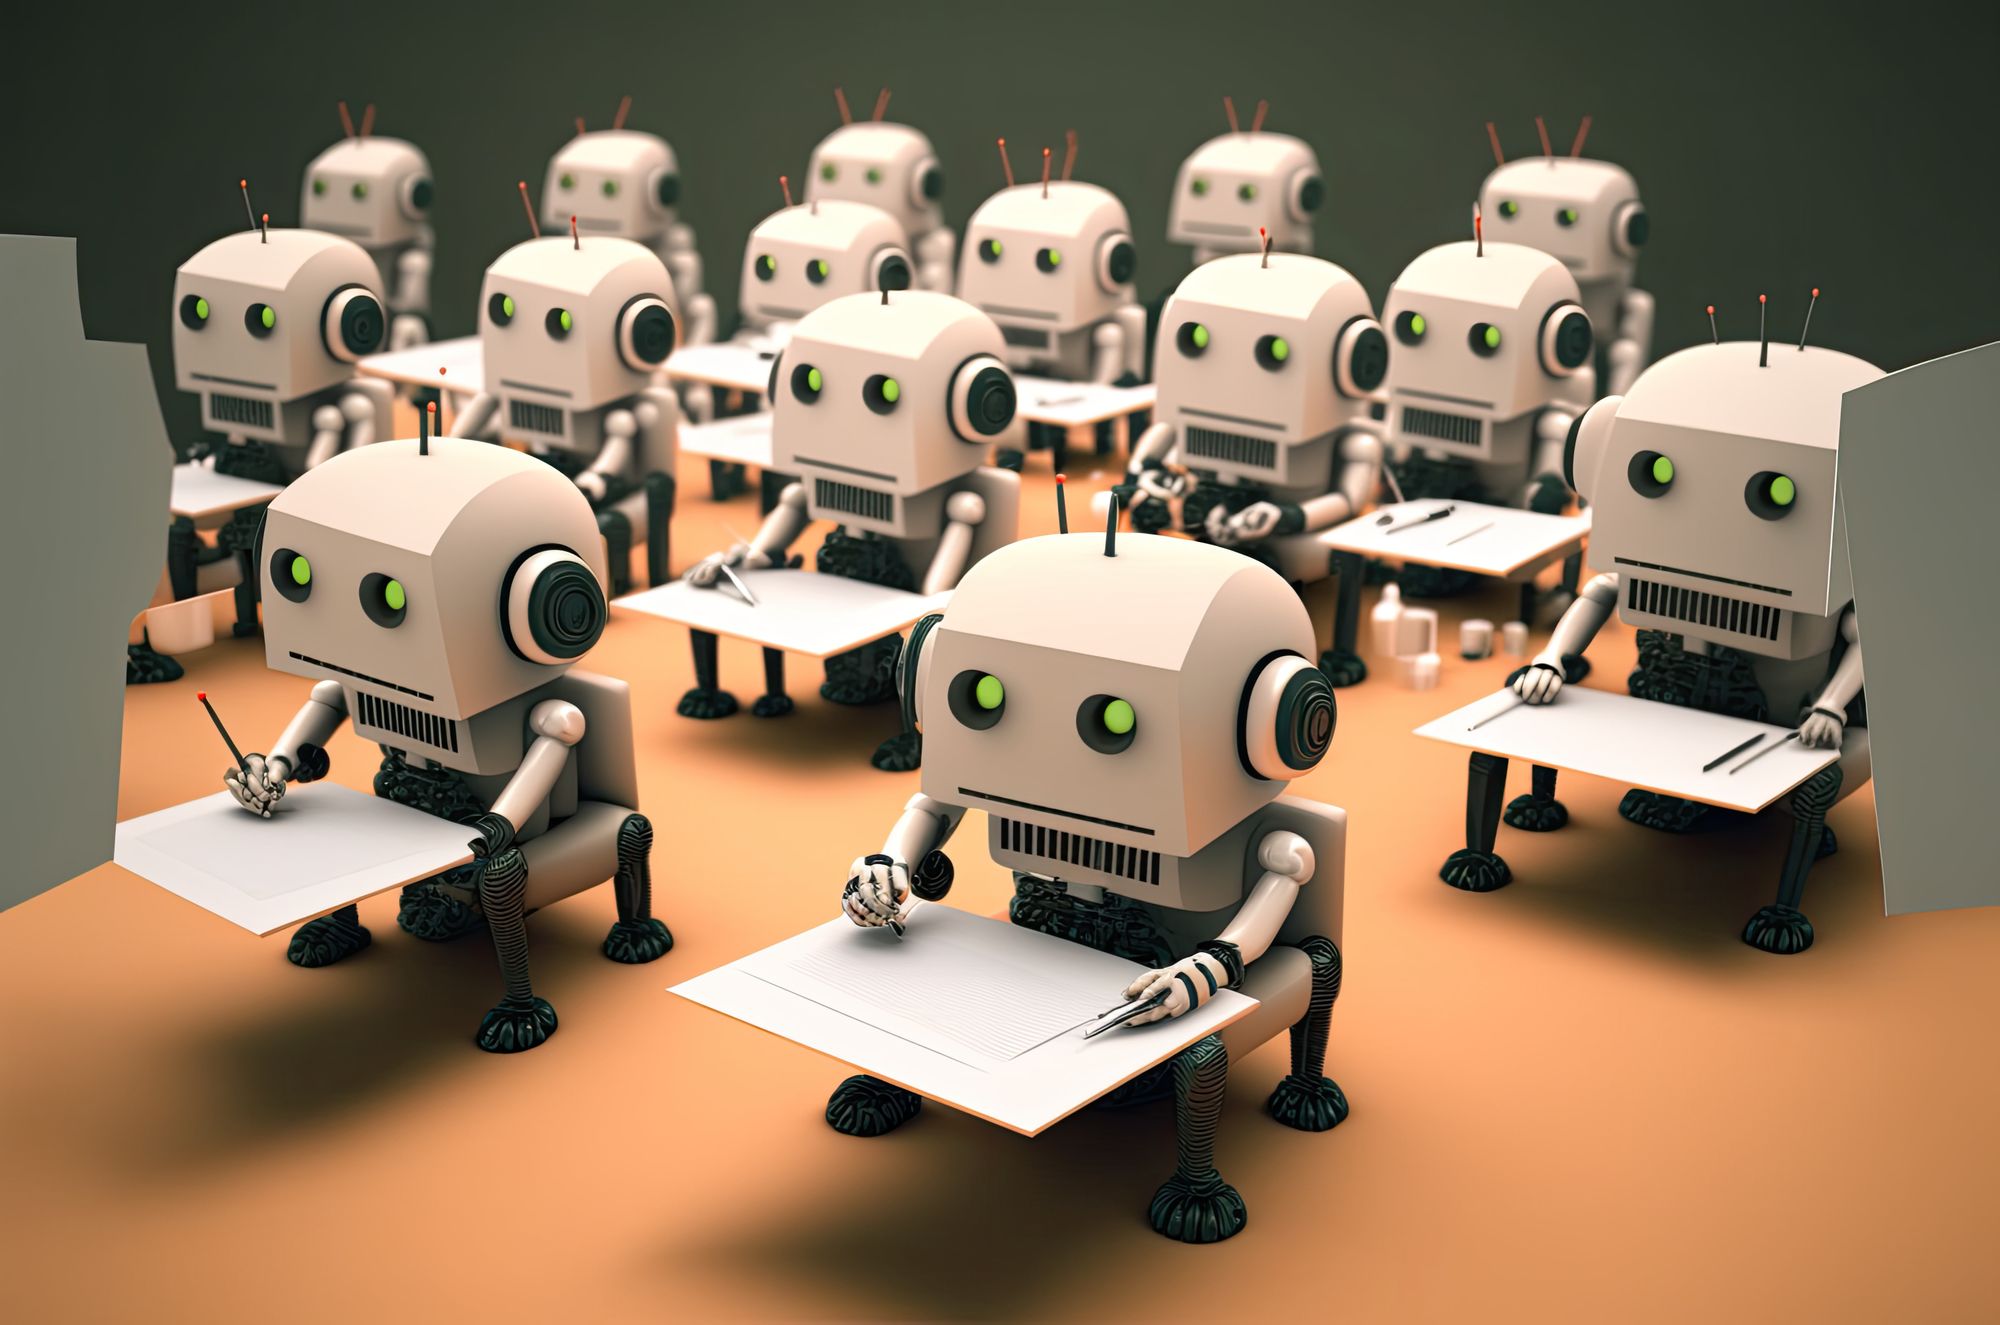 Animated concept of a room filled with identical robots writing at desks.